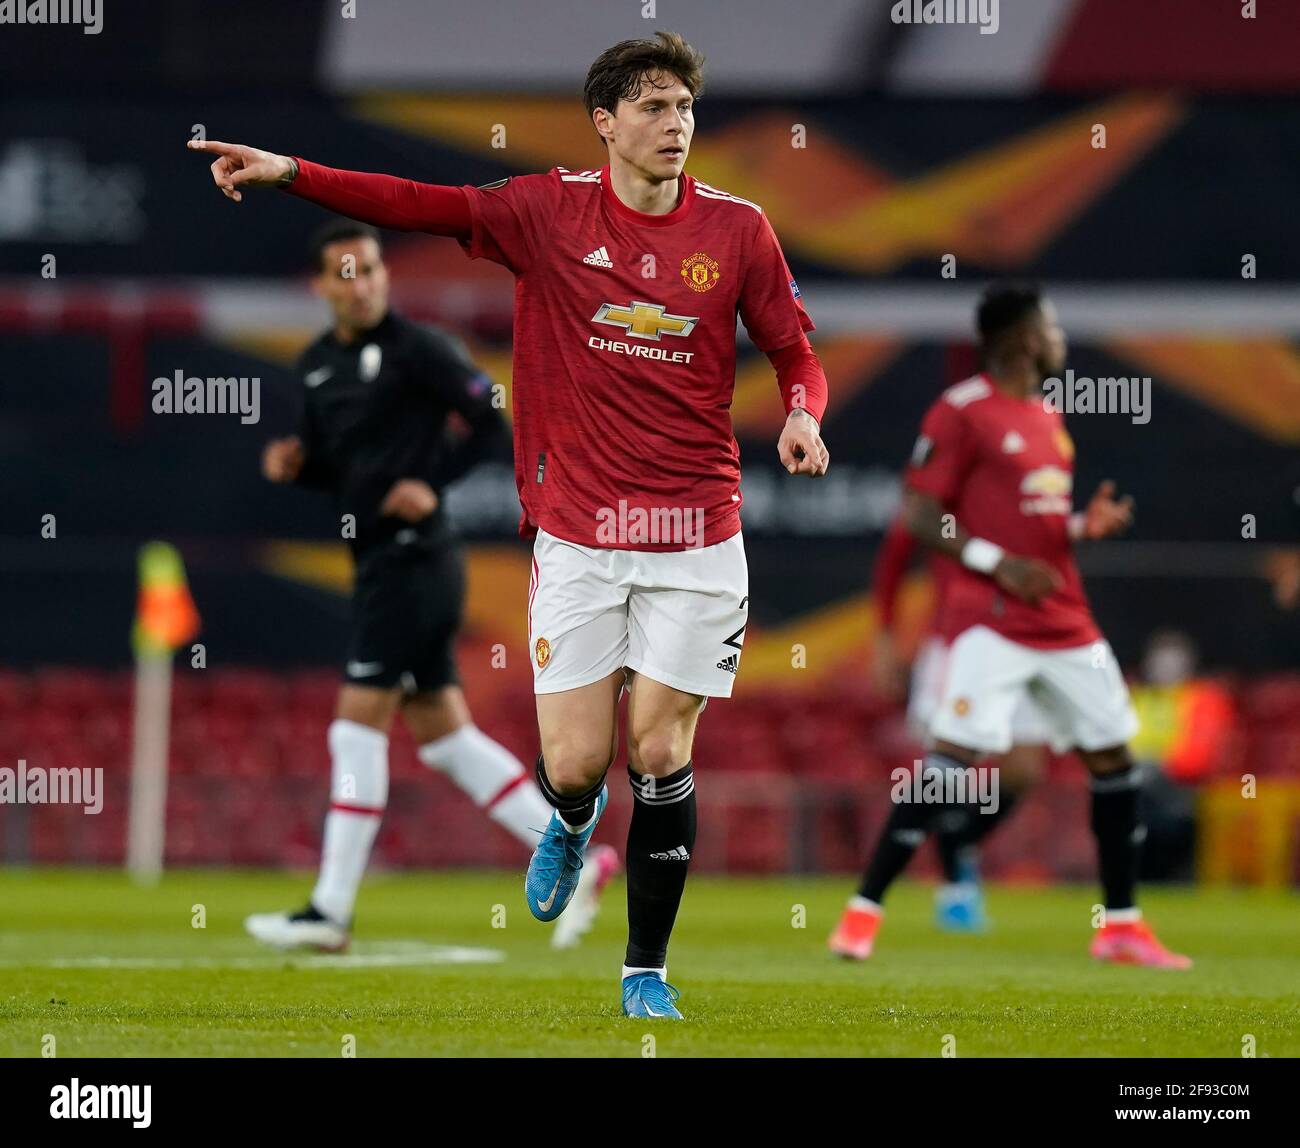 Manchester, England, 15th April 2021. Victor Lindelof of Manchester United during the UEFA Europa League match at Old Trafford, Manchester. Picture credit should read: Andrew Yates / Sportimage Stock Photo